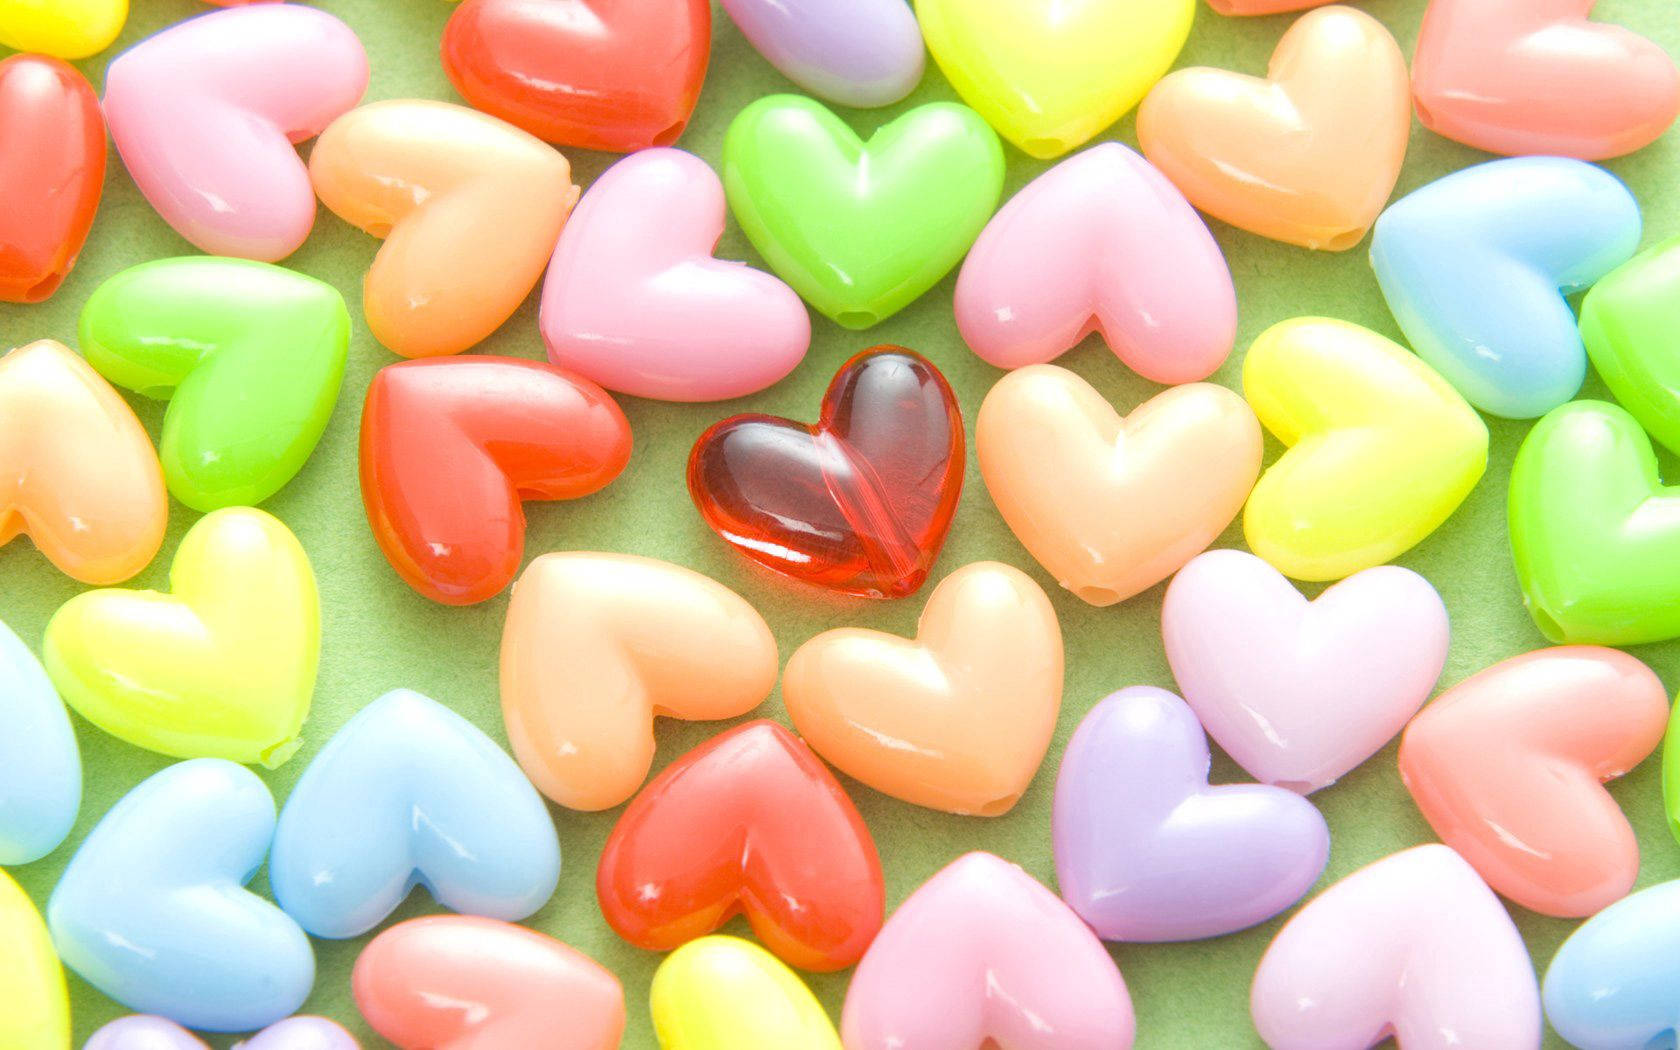 Colorful Hearts On Green Table Background